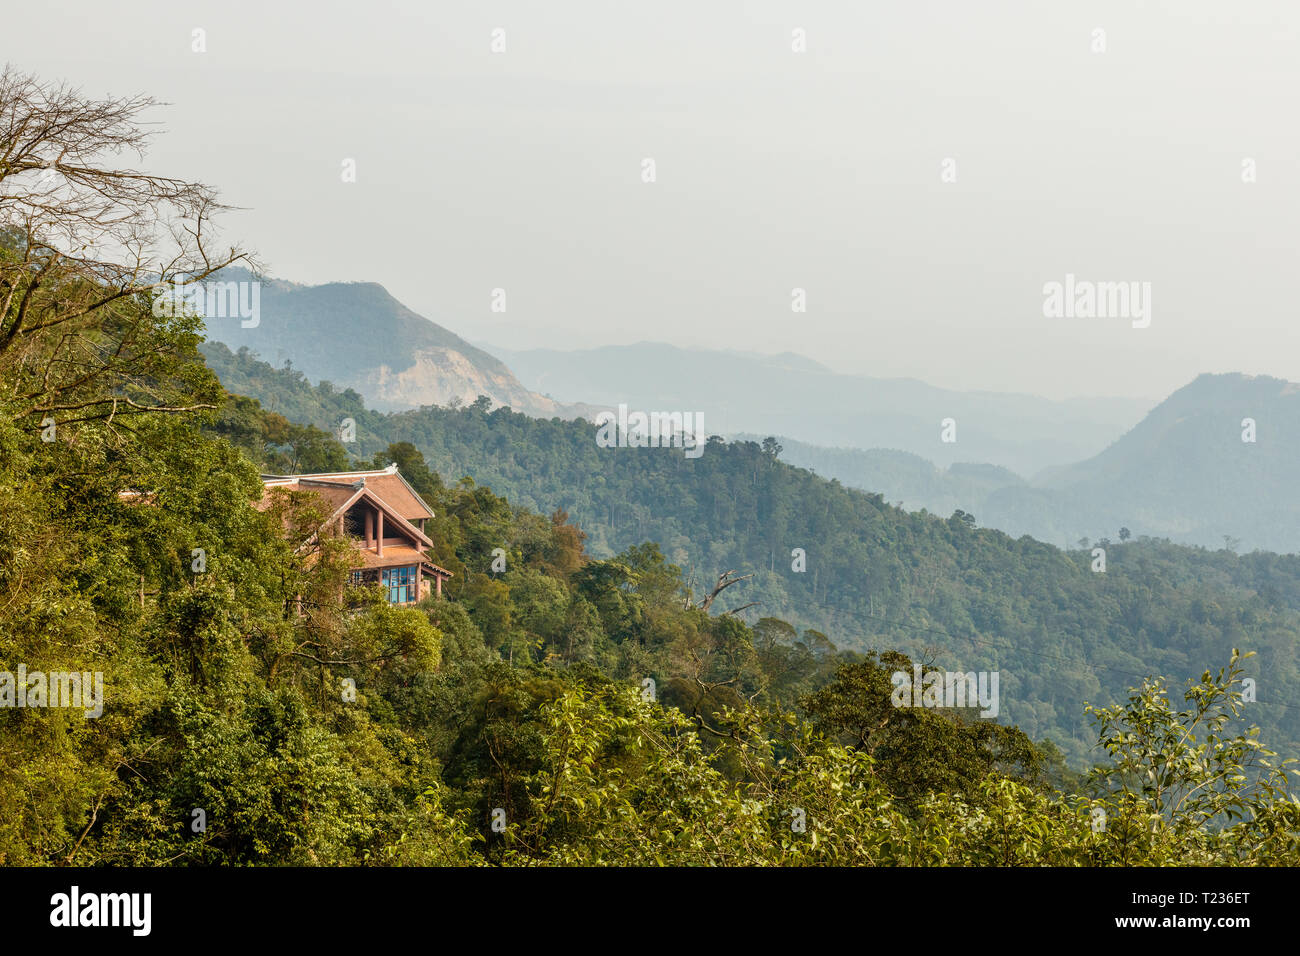 Landscapes of Yen Tu Mountain and ancient Buddhist complex, Quang Ninh Province, Vietnam. Stock Photo